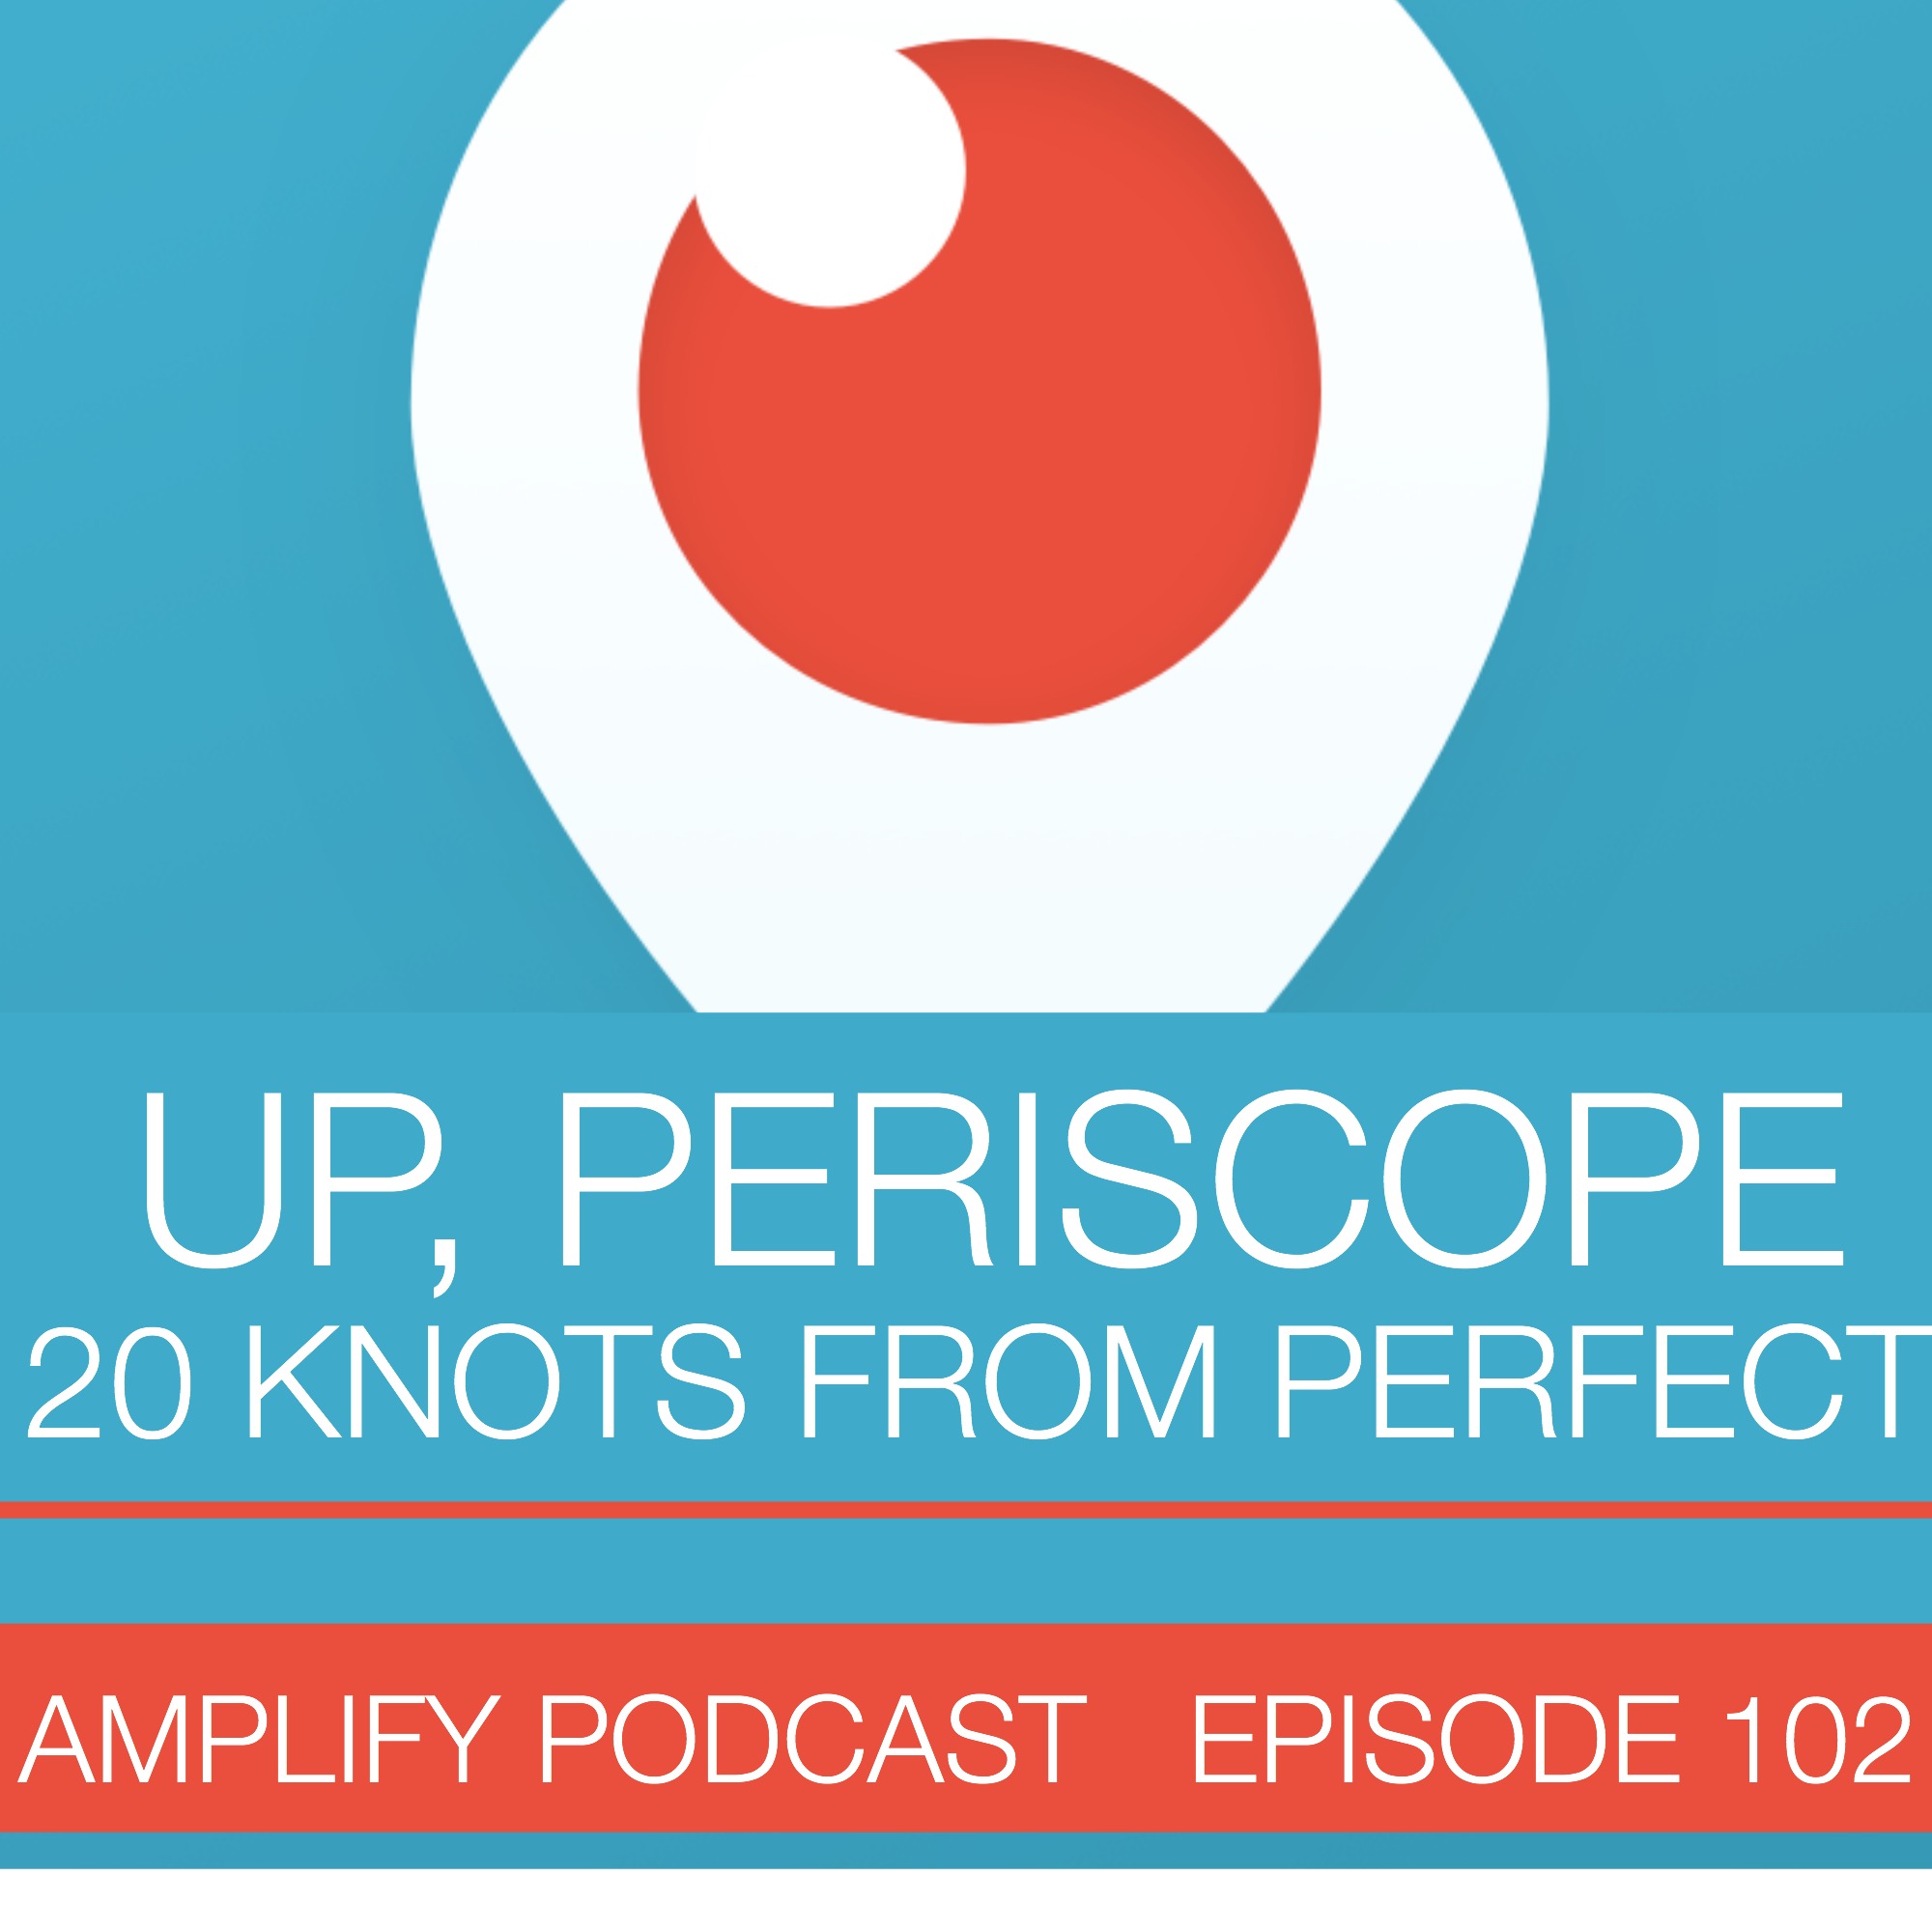 Read more about the article Up Periscope, 20 Knots from Perfect